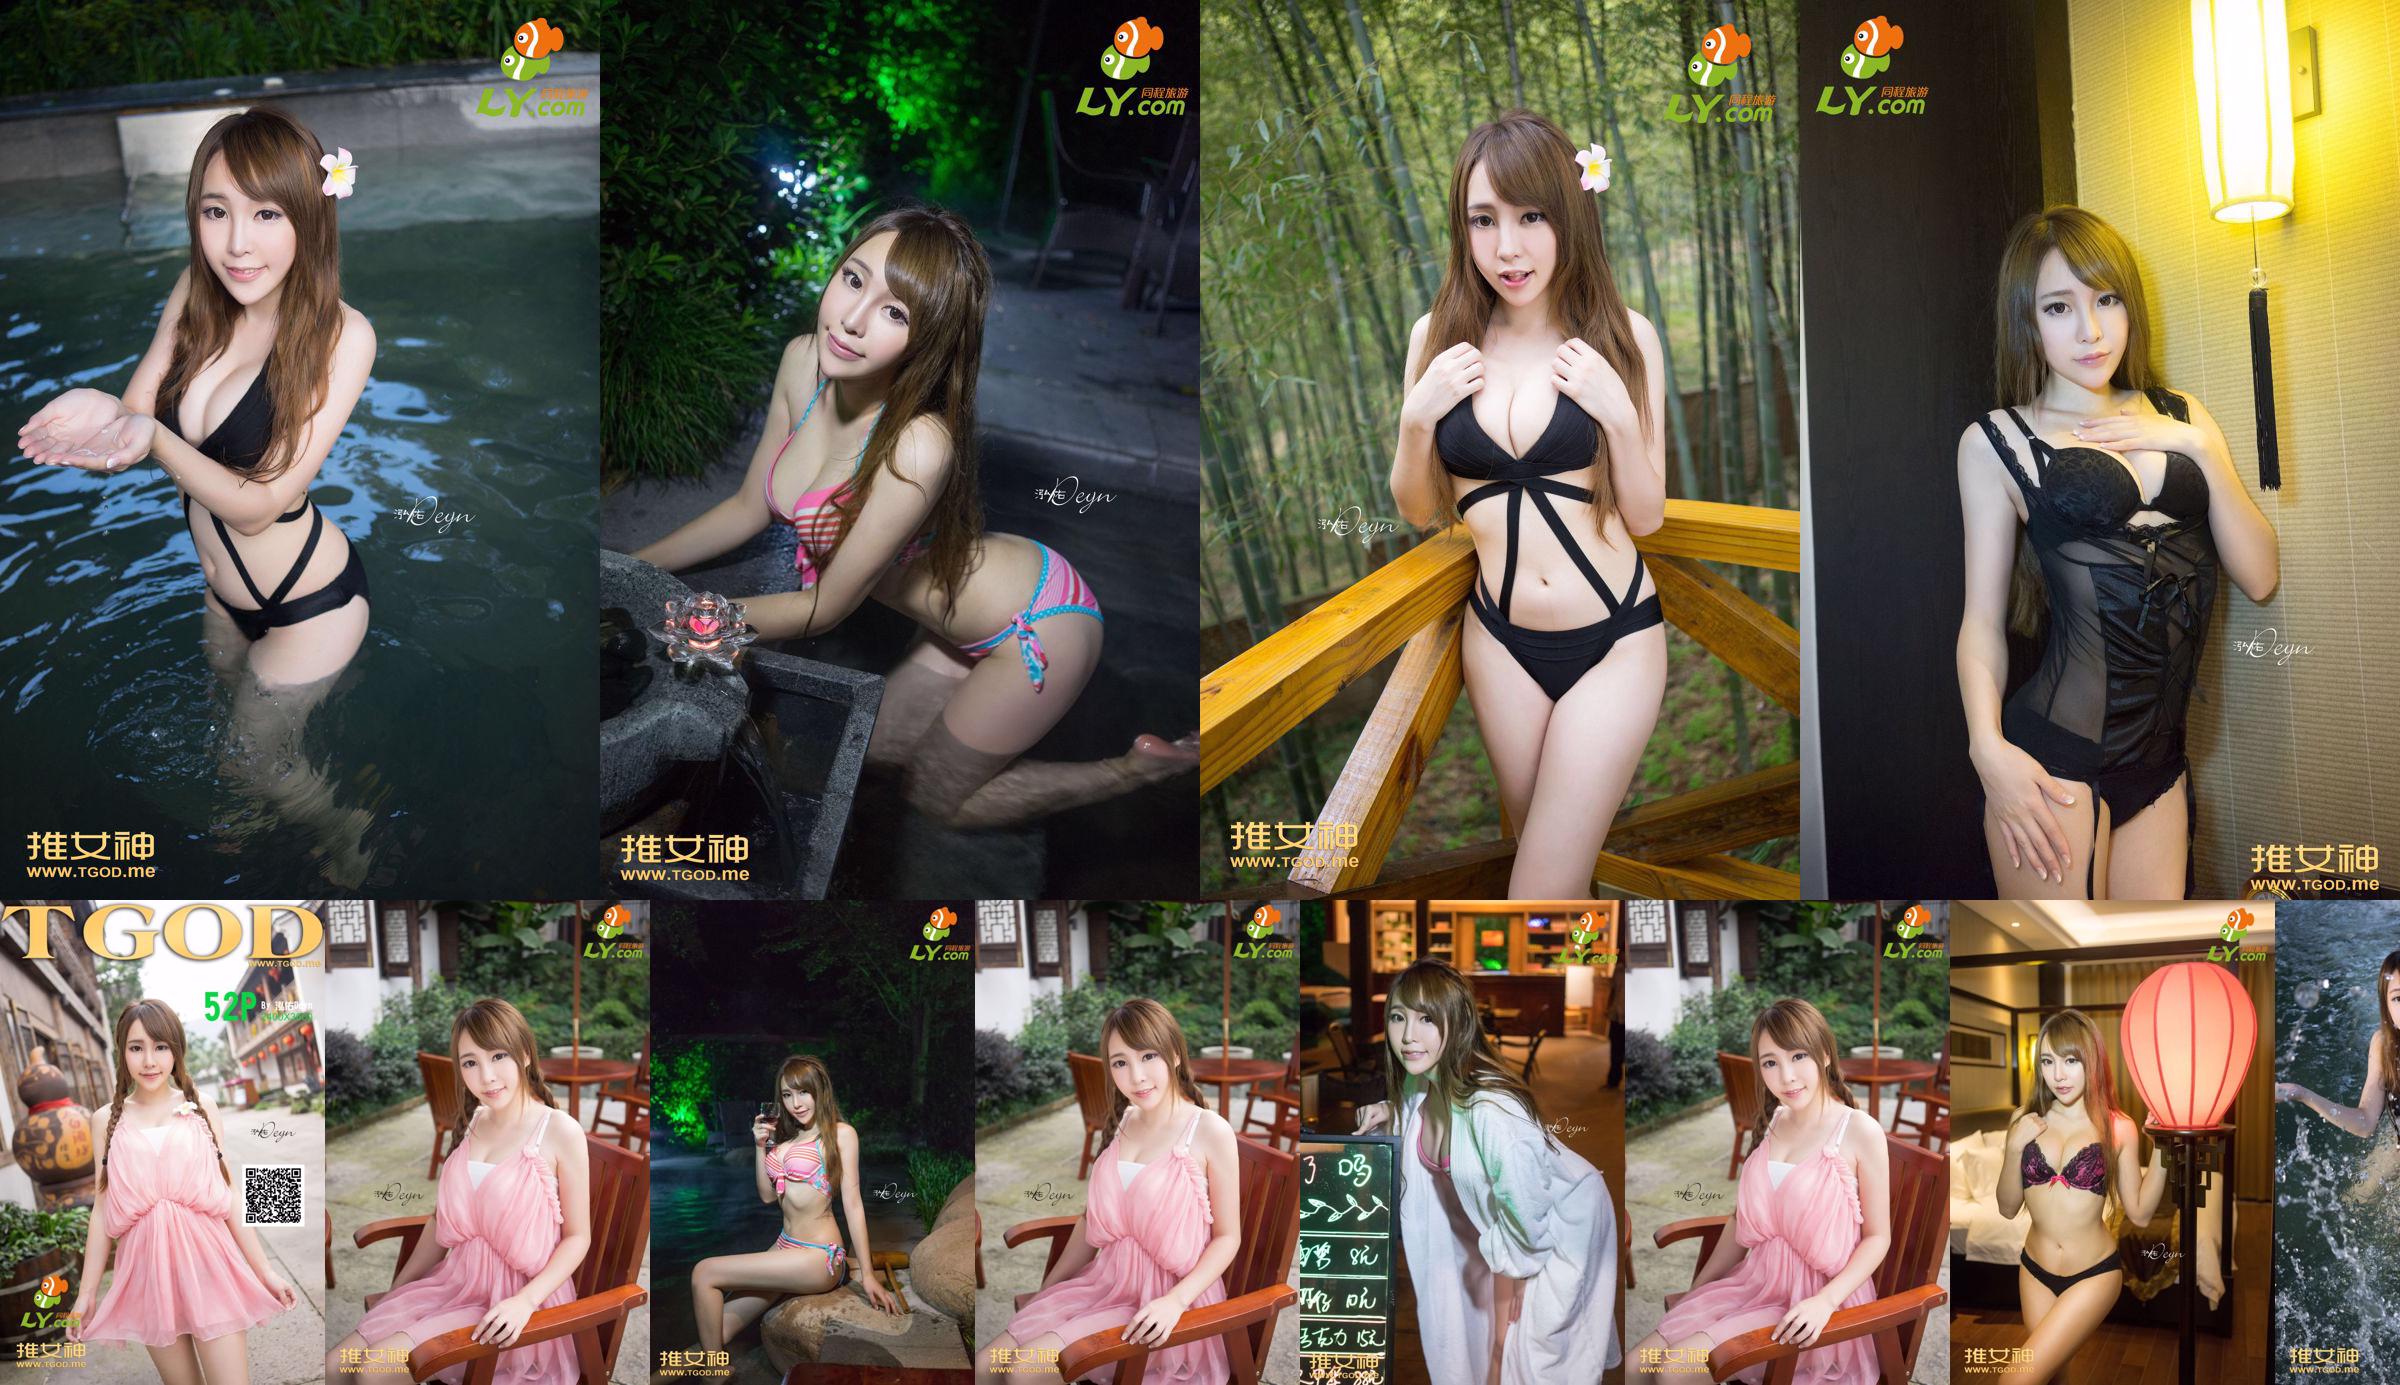 Huang Mengxian "Where Is the Goddess Going Issue 7" [TGOD Push Goddess] No.101d43 Pagina 1